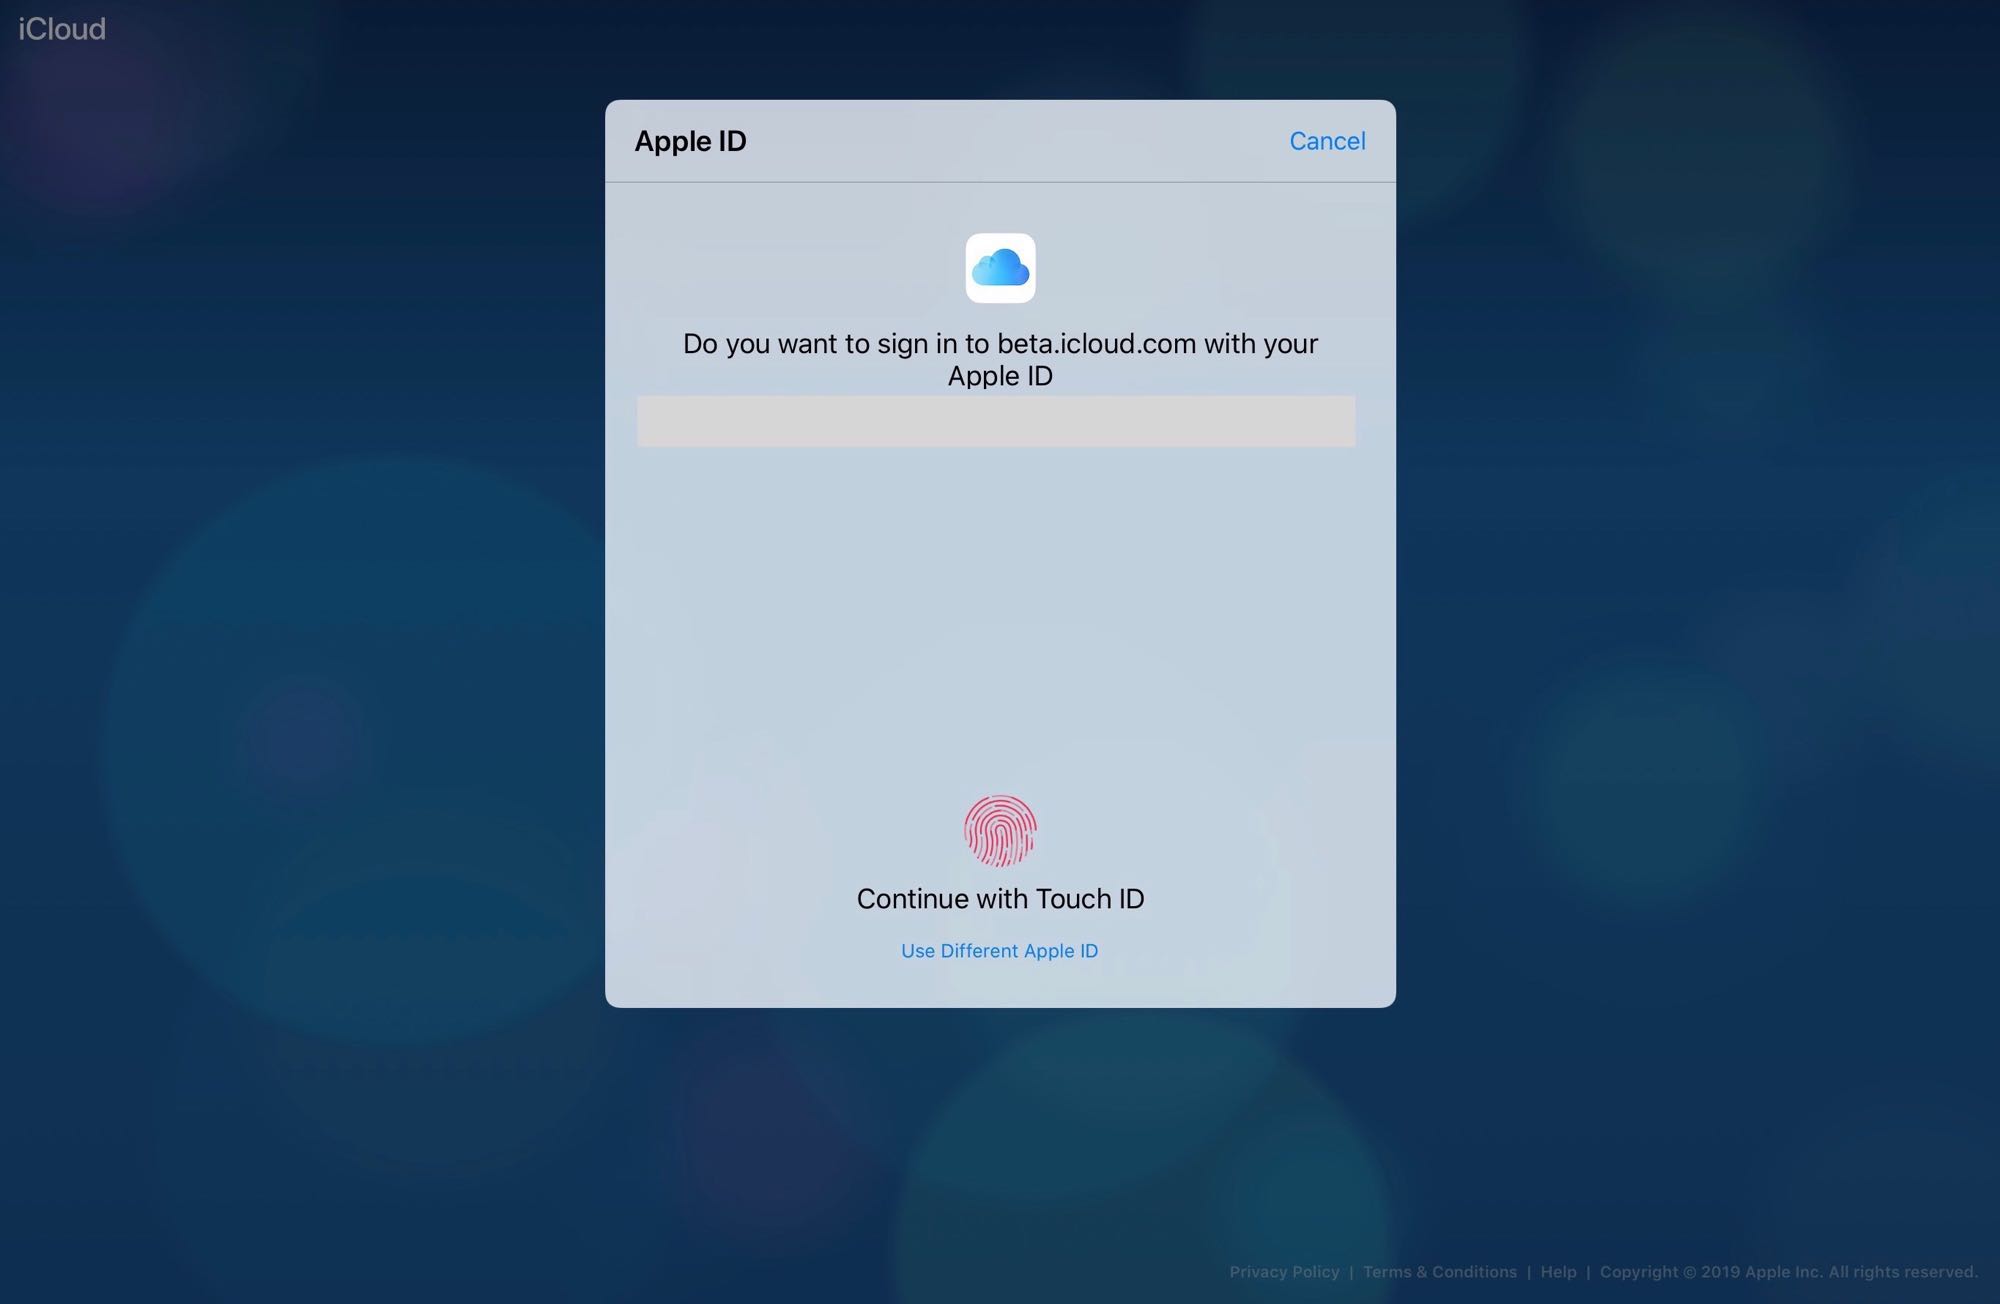 The latest Apple betas offer the option of signing in with Face ID or Touch ID.